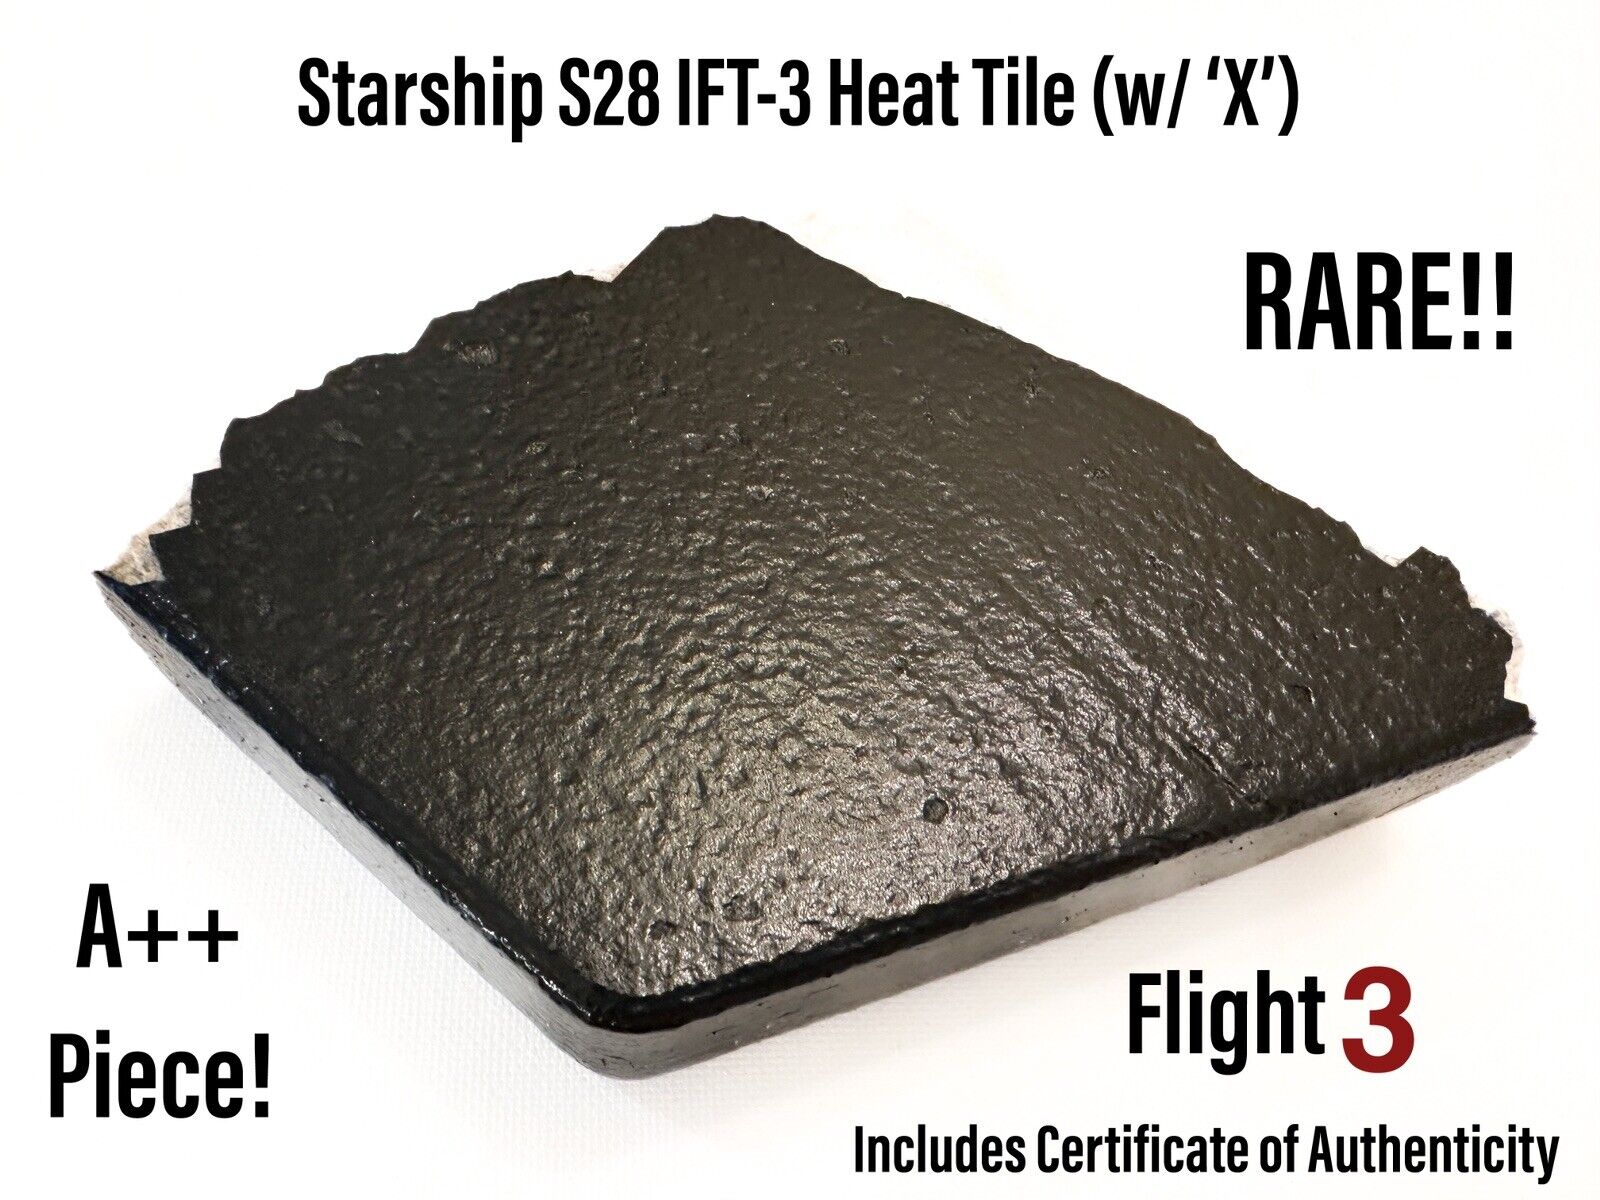 SpaceX Starship S28 Flight 3 Thermal Heat Tile w/ ‘X’ & 28 IFT3 Patch  RARE